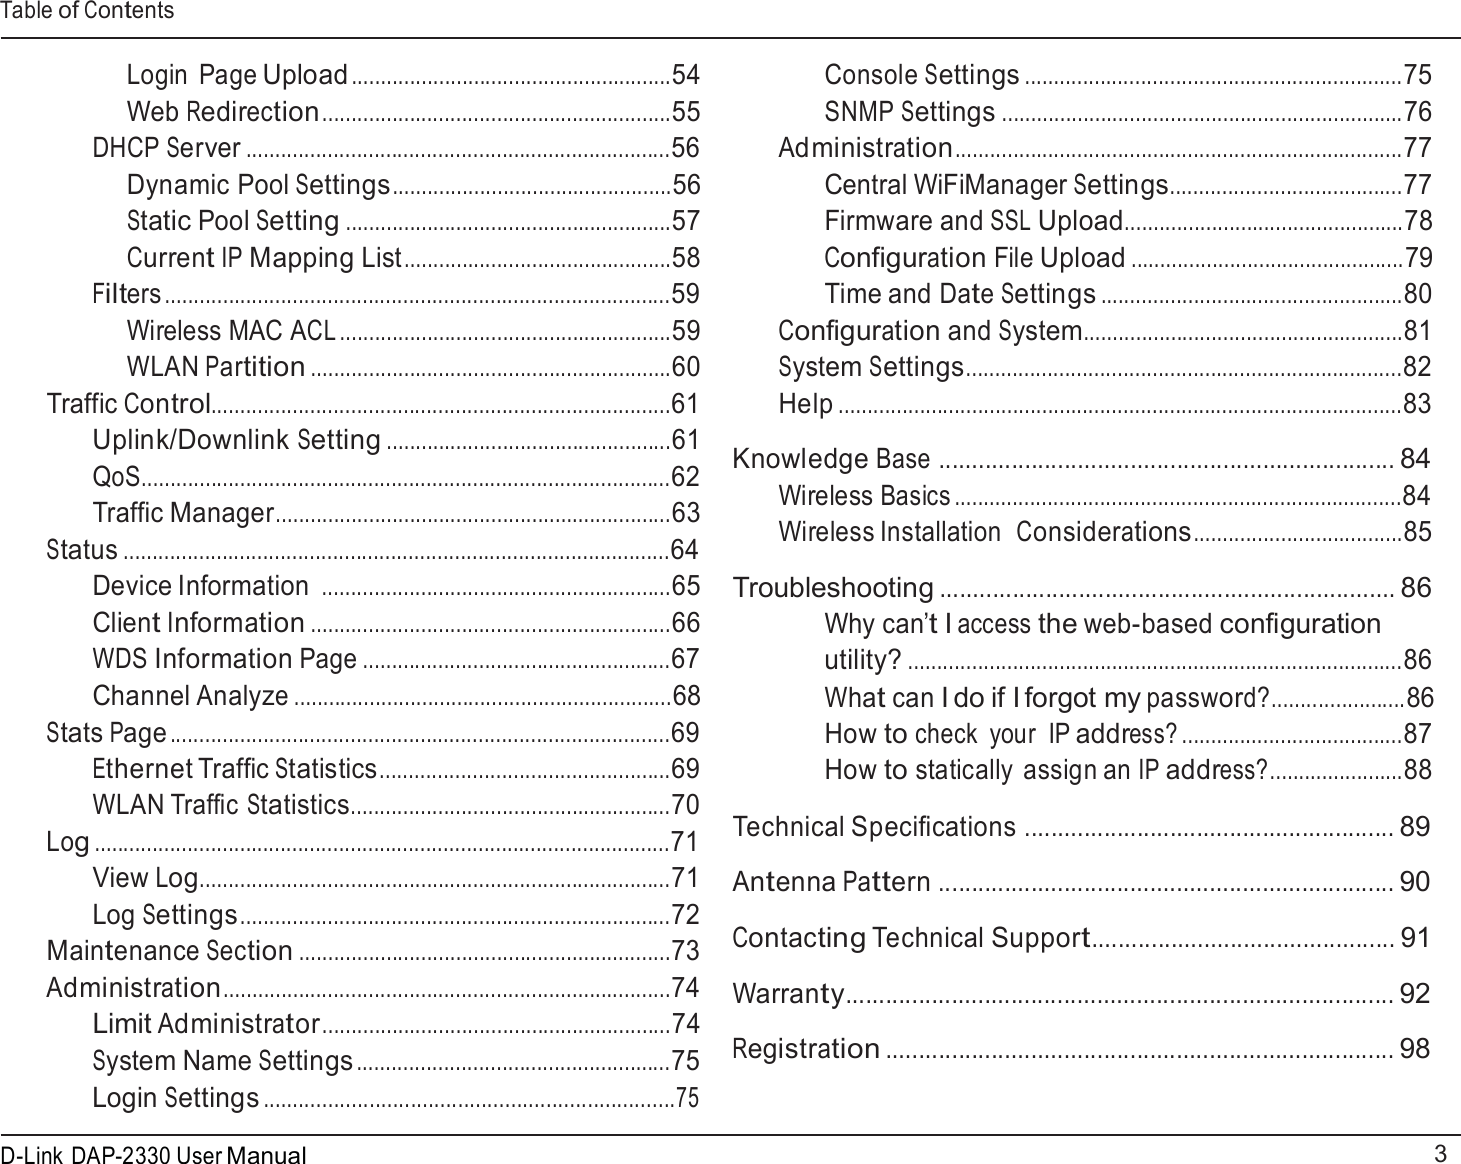 Table of Contents 3 D-Link DAP-2330 User Manual    Login  Page Upload .......................................................54 Web Redirection............................................................55 DHCP Server .........................................................................56 Dynamic Pool Settings................................................56 Static Pool Setting ........................................................57 Current IP Mapping List..............................................58 Filters .......................................................................................59 Wireless MAC ACL .........................................................59 WLAN Partition ..............................................................60 Traffic Control...............................................................................61 Uplink/Downlink Setting .................................................61 QoS...........................................................................................62 Traffic Manager....................................................................63 Status ..............................................................................................64 Device Information ............................................................65 Client Information ..............................................................66 WDS Information Page .....................................................67 Channel Analyze .................................................................68 Stats Page ......................................................................................69 Ethernet Traffic Statistics..................................................69 WLAN Traffic Statistics.......................................................70 Log ...................................................................................................71 View Log.................................................................................71 Log Settings..........................................................................72 Maintenance Section ................................................................73 Administration.............................................................................74 Limit Administrator ............................................................74 System Name Settings ......................................................75 Login Settings ......................................................................75 Console Settings .................................................................75 SNMP Settings .....................................................................76 Administration.............................................................................77 Central WiFiManager Settings........................................77 Firmware and SSL Upload................................................78 Configuration File Upload ...............................................79 Time and Date Settings ....................................................80 Configuration and System.......................................................81 System Settings...........................................................................82 Help .................................................................................................83  Knowledge Base ..................................................................... 84 Wireless Basics .............................................................................84 Wireless Installation  Considerations....................................85  Troubleshooting ..................................................................... 86 Why can’t I access the web-based configuration utility? .....................................................................................86 What can I do if I forgot my password?.......................86 How to check  your  IP address? ......................................87 How to statically assign an IP address?.......................88  Technical Specifications ........................................................ 89  Antenna Pattern ..................................................................... 90  Contacting Technical Support.............................................. 91  Warranty................................................................................... 92  Registration ............................................................................. 98 